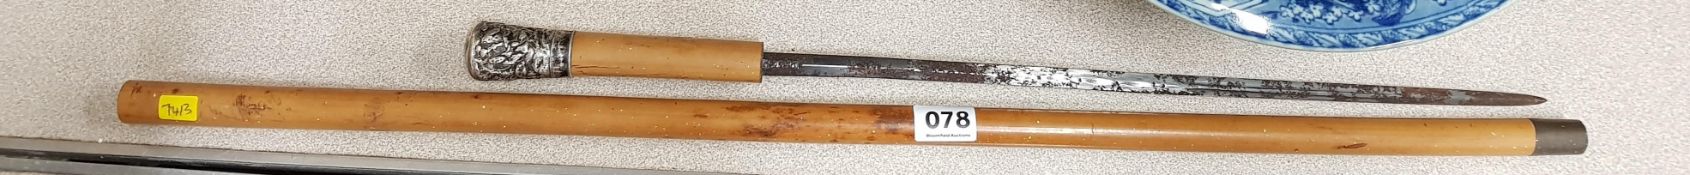 SILVER TOPPED SWORD STICK